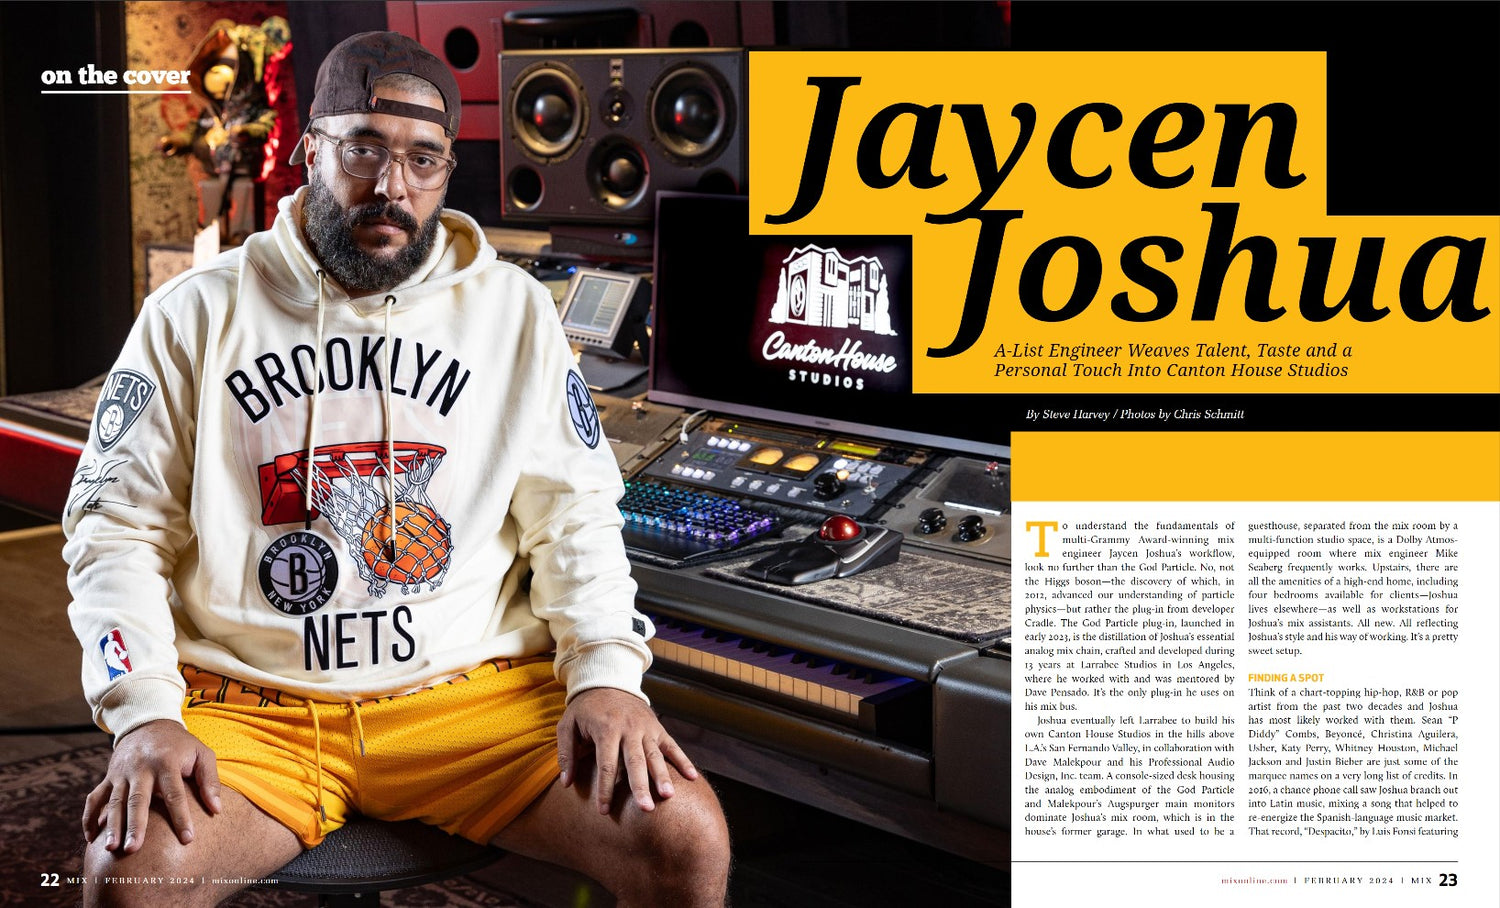 Jaycen Joshua Featured by Mix Magazine - A-List Engineer Weaves Talent, Taste and a Personal Touch Into Canton House Studios